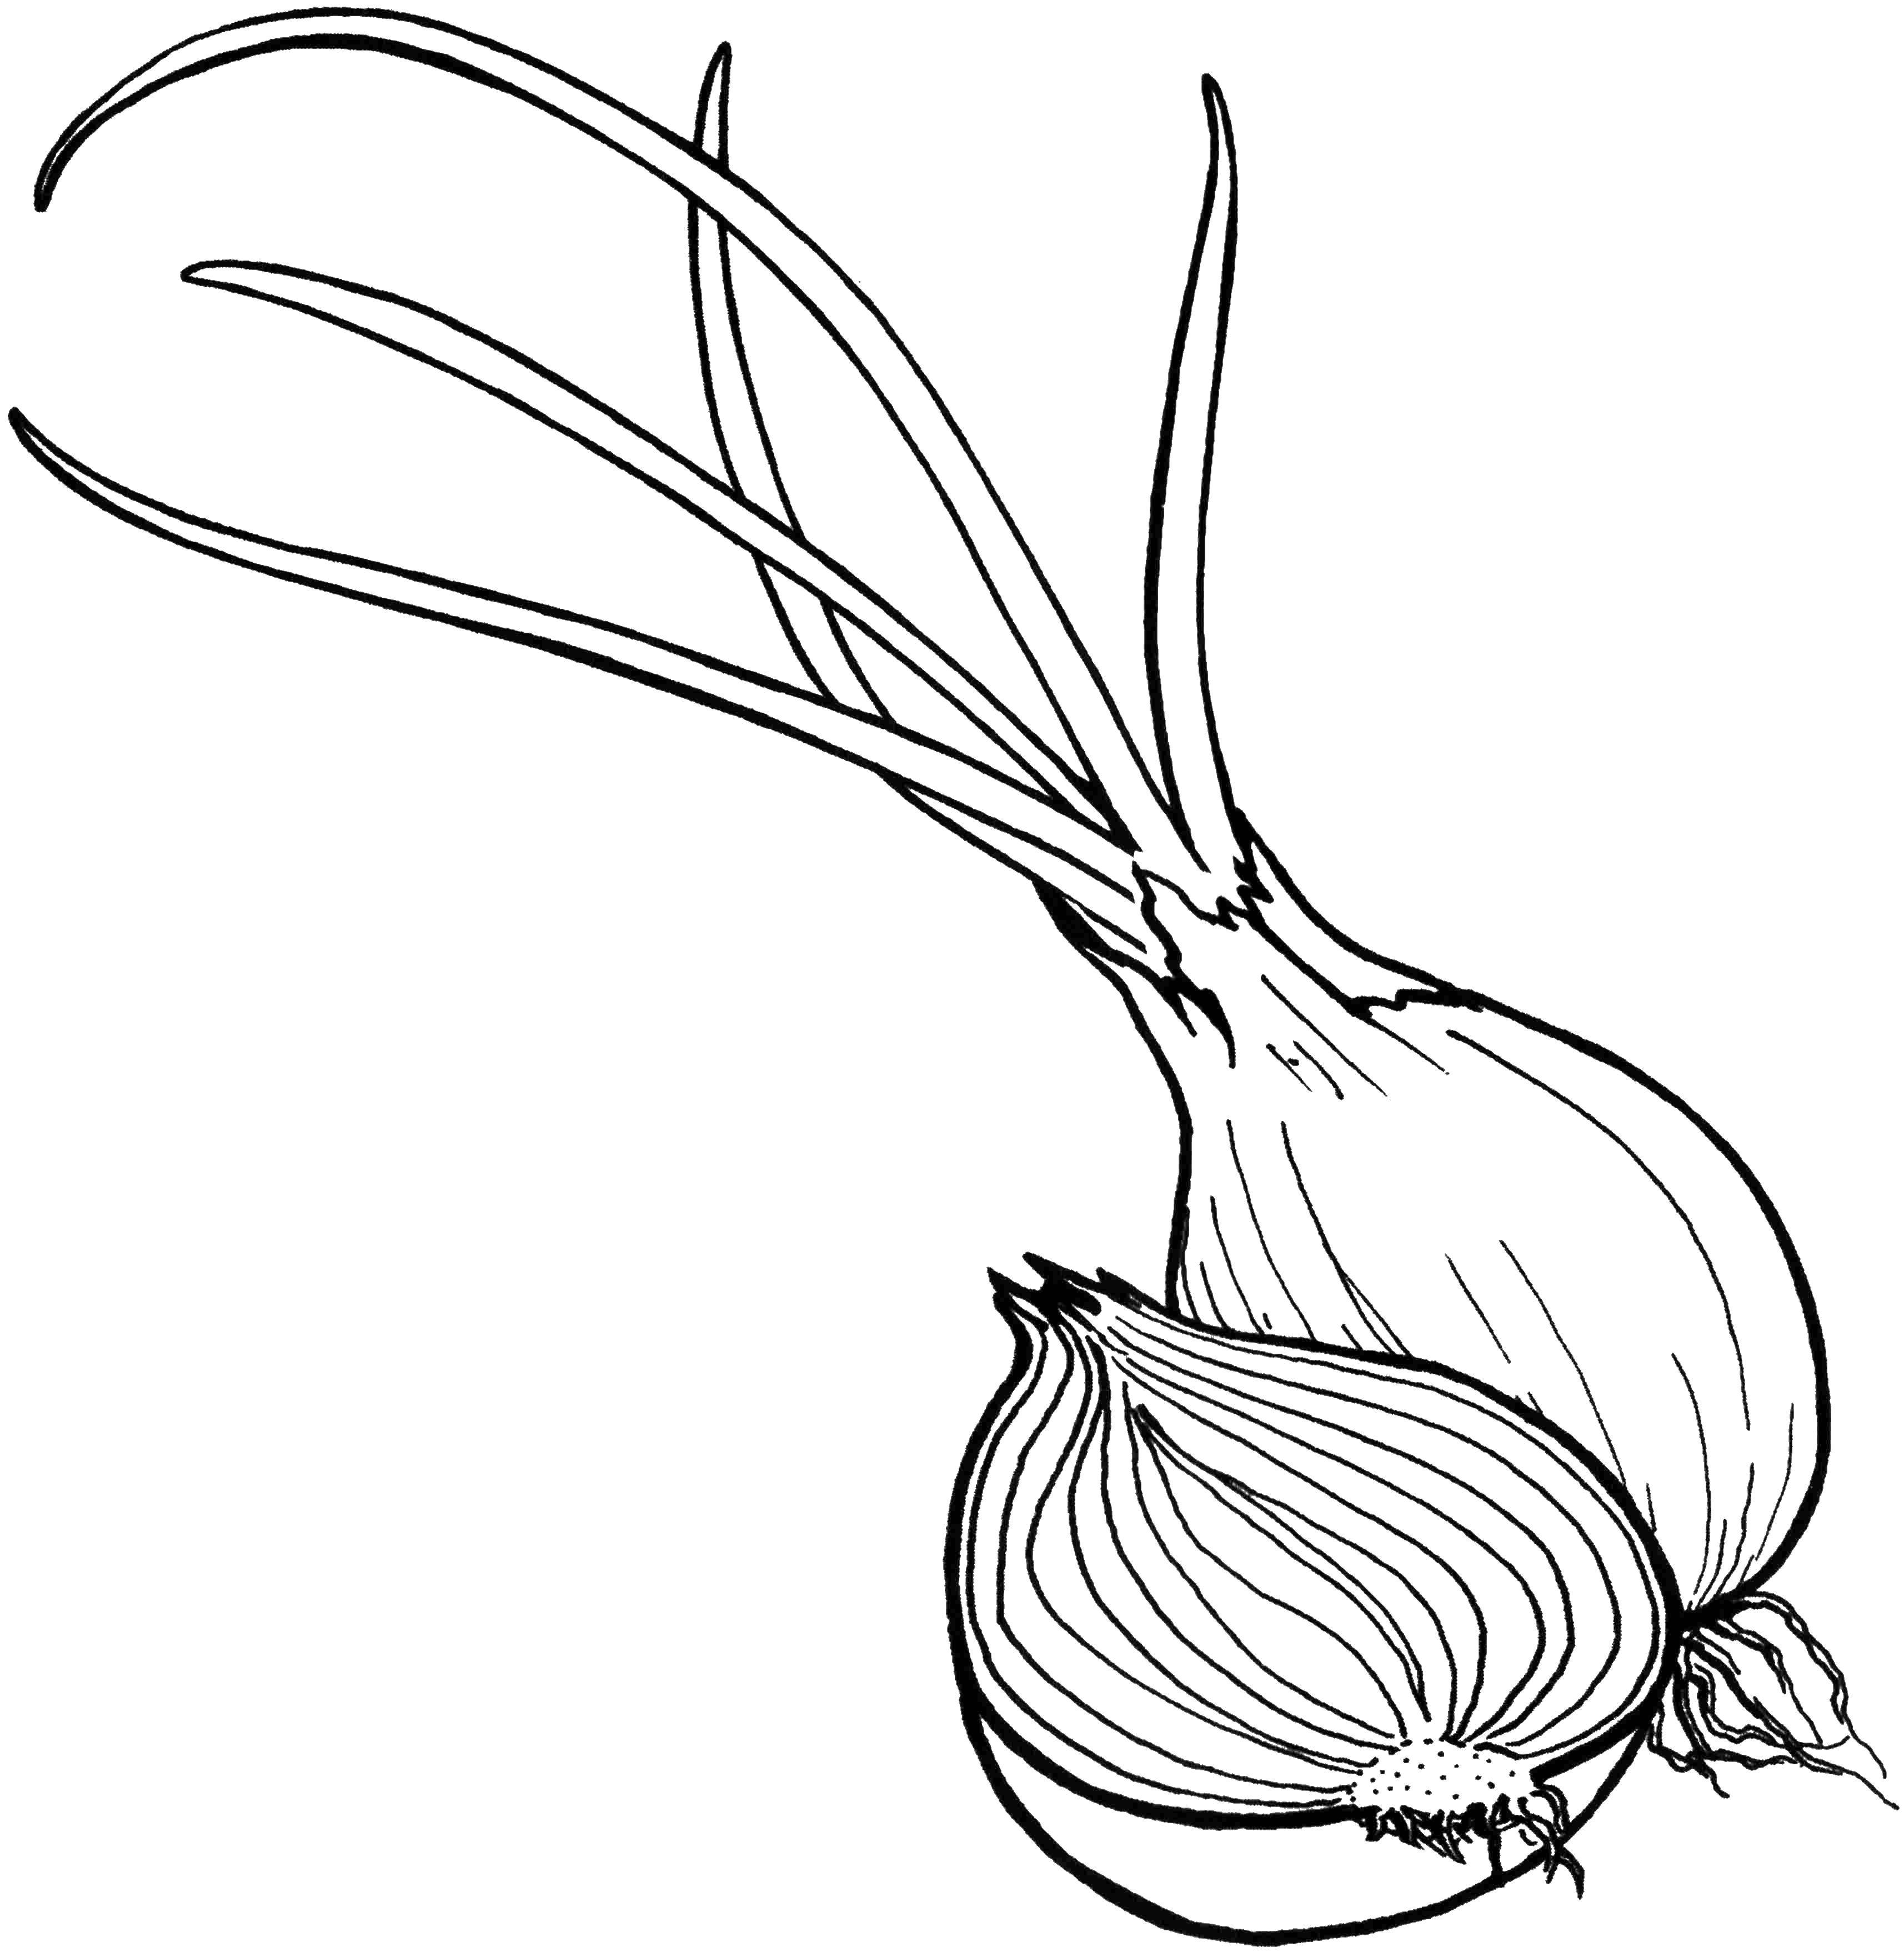 Coloring Onion. Category Vegetables in English. Tags:  English, vegetables.